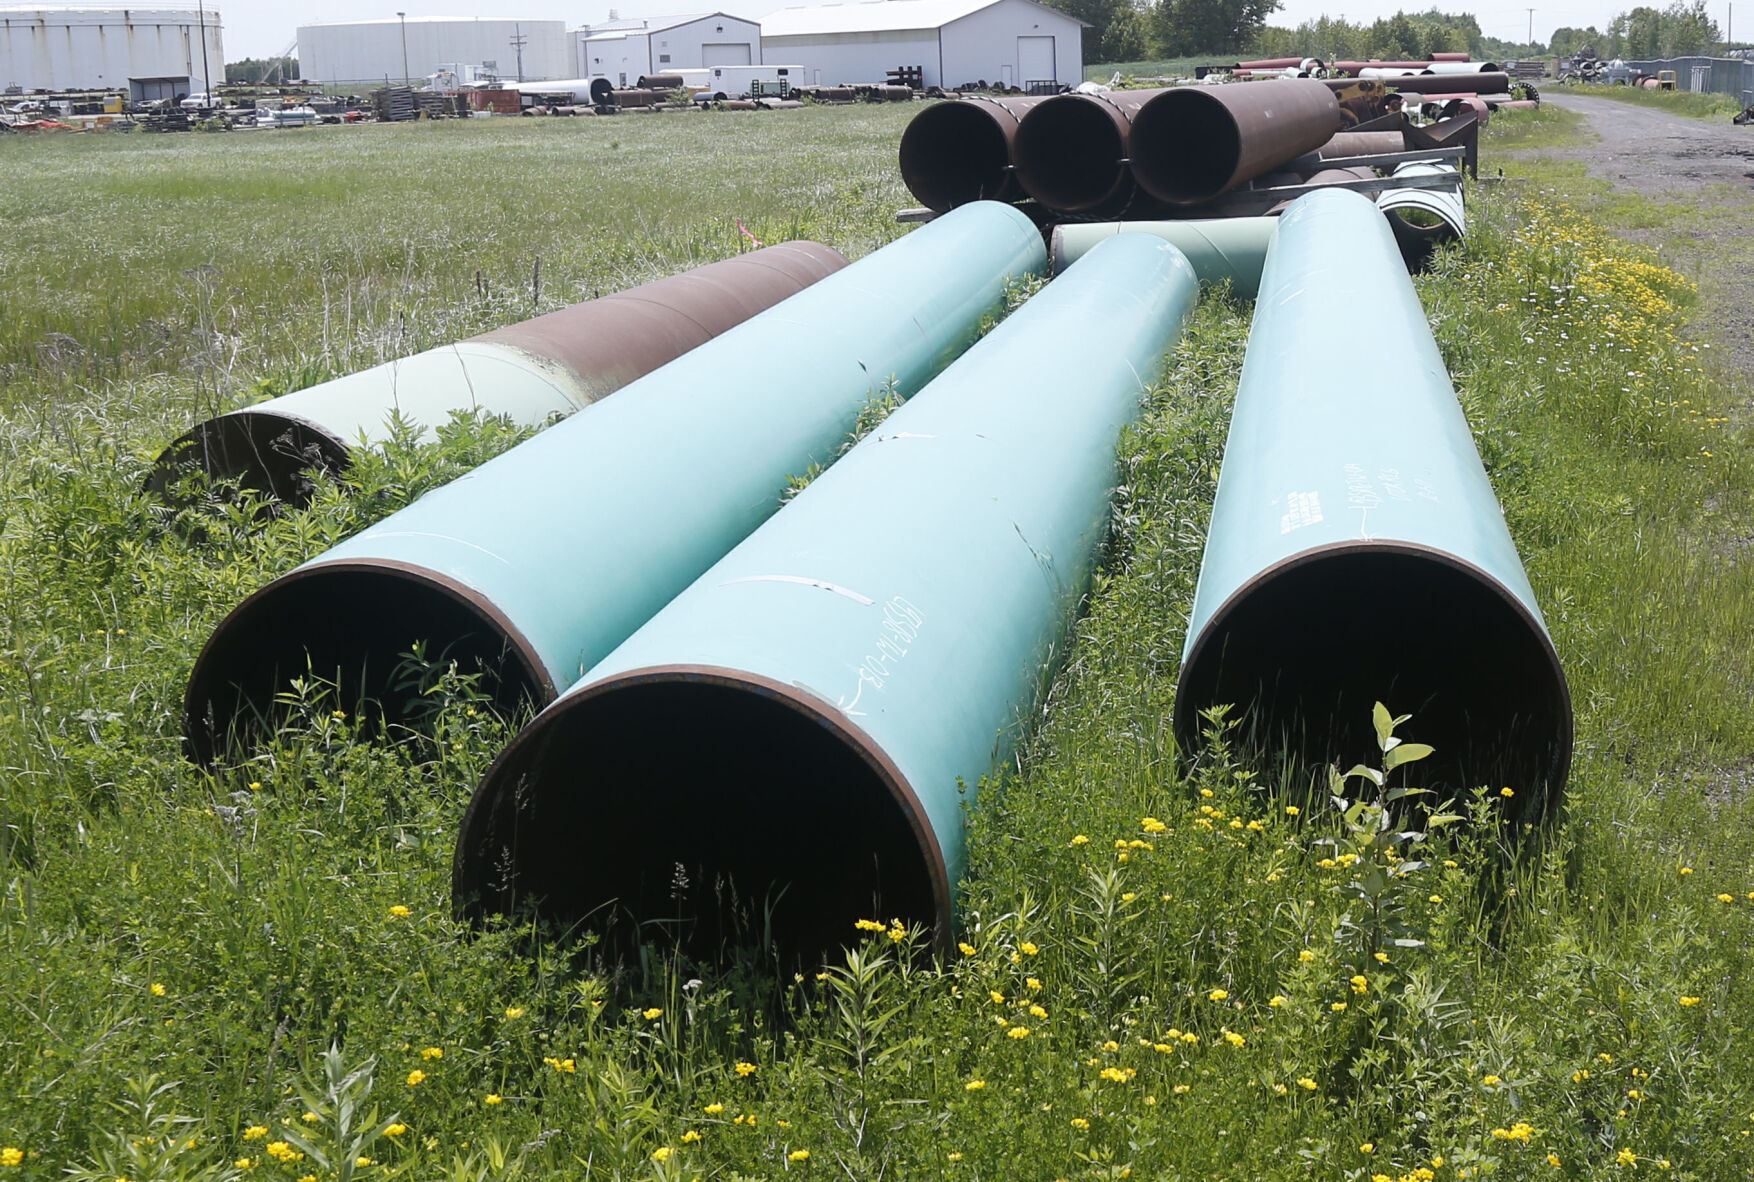 <p>FILE - Pipeline used to carry crude oil sits at the Superior, Wis., terminal of Enbridge Energy, June 29, 2018. Attorneys for a Wisconsin Native American tribe are set to argue Thursday, May 18, 2023, that a federal judge should order an energy company to shut down an oil pipeline the tribe says is at immediate risk of being exposed by erosion and rupturing on reservation land. (AP Photo/Jim Mone, File)</p>   PHOTO CREDIT: Jim Mone